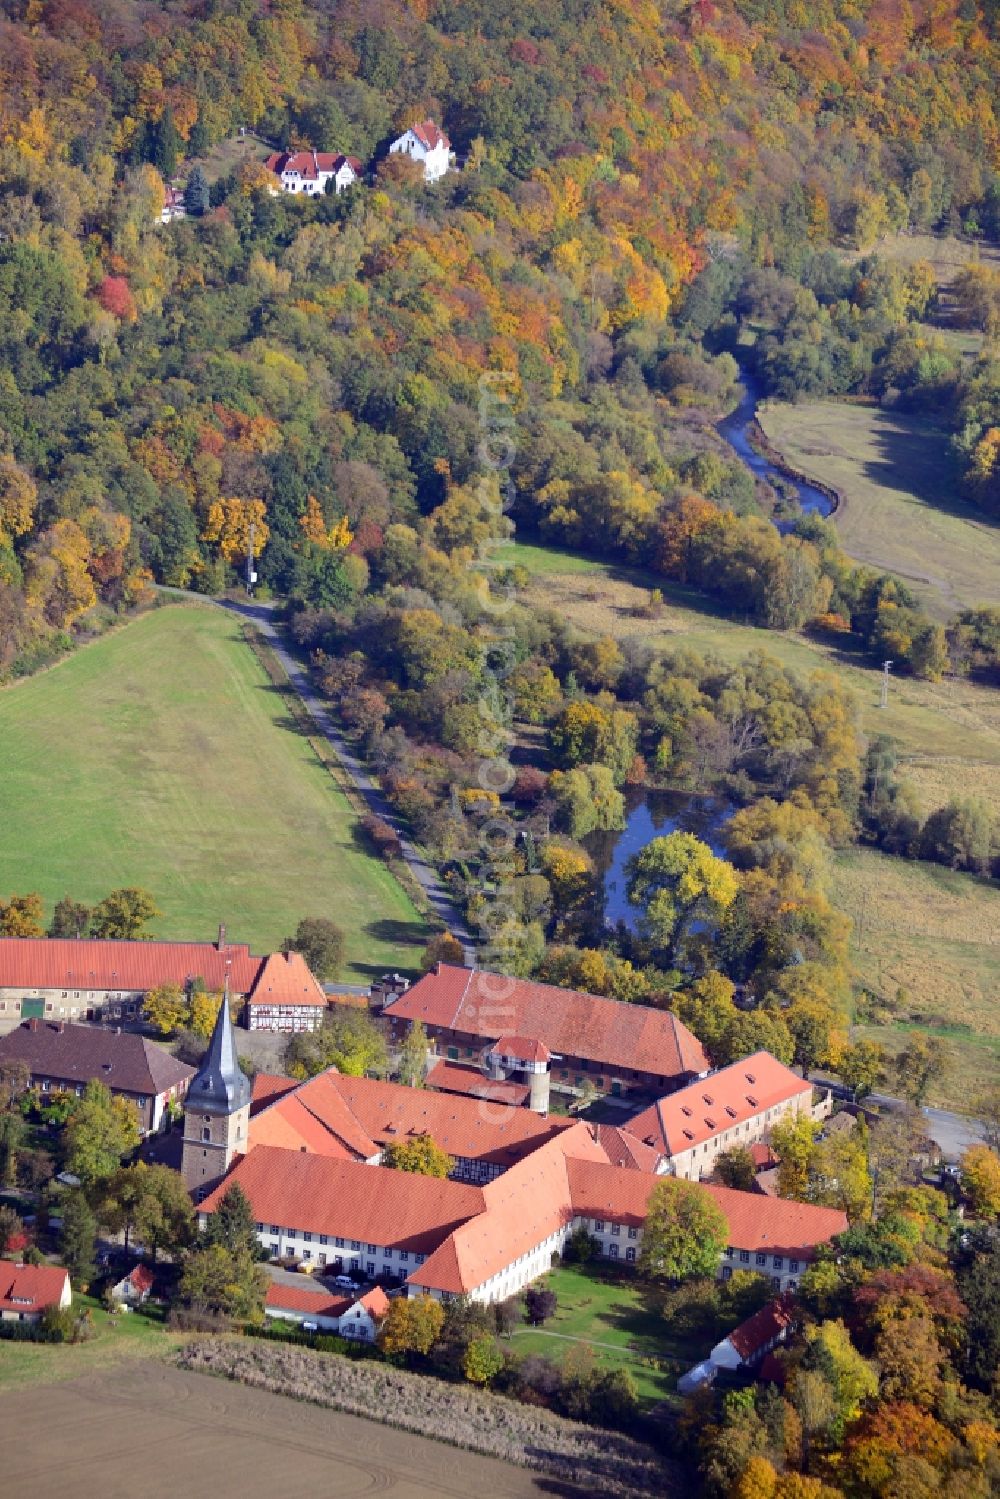 Aerial image Wöltingerode - View of the monastery in Wöltingerode in the state Lower Saxony. The monasery, once founded as a Benedictine monastery, today is used as a cloister hotel and for a distillery